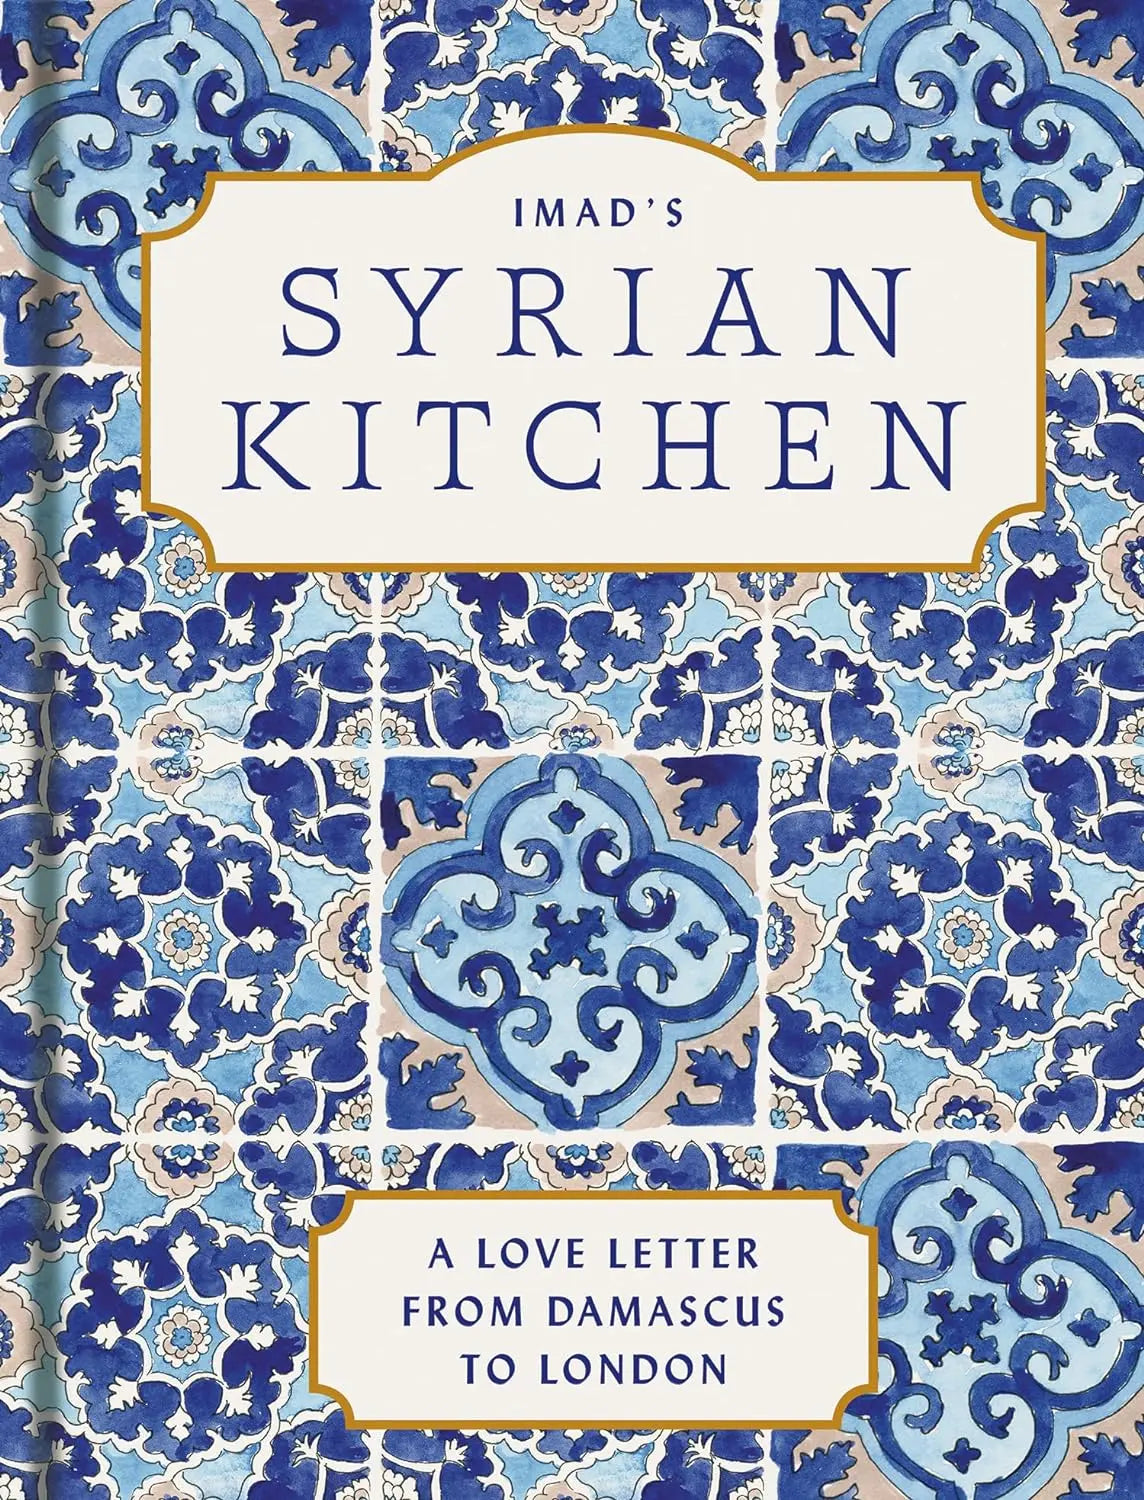 Imad’s Syrian Kitchen: The Sunday Times bestseller A Love Letter from Damascus to London - Migration Museum Shop